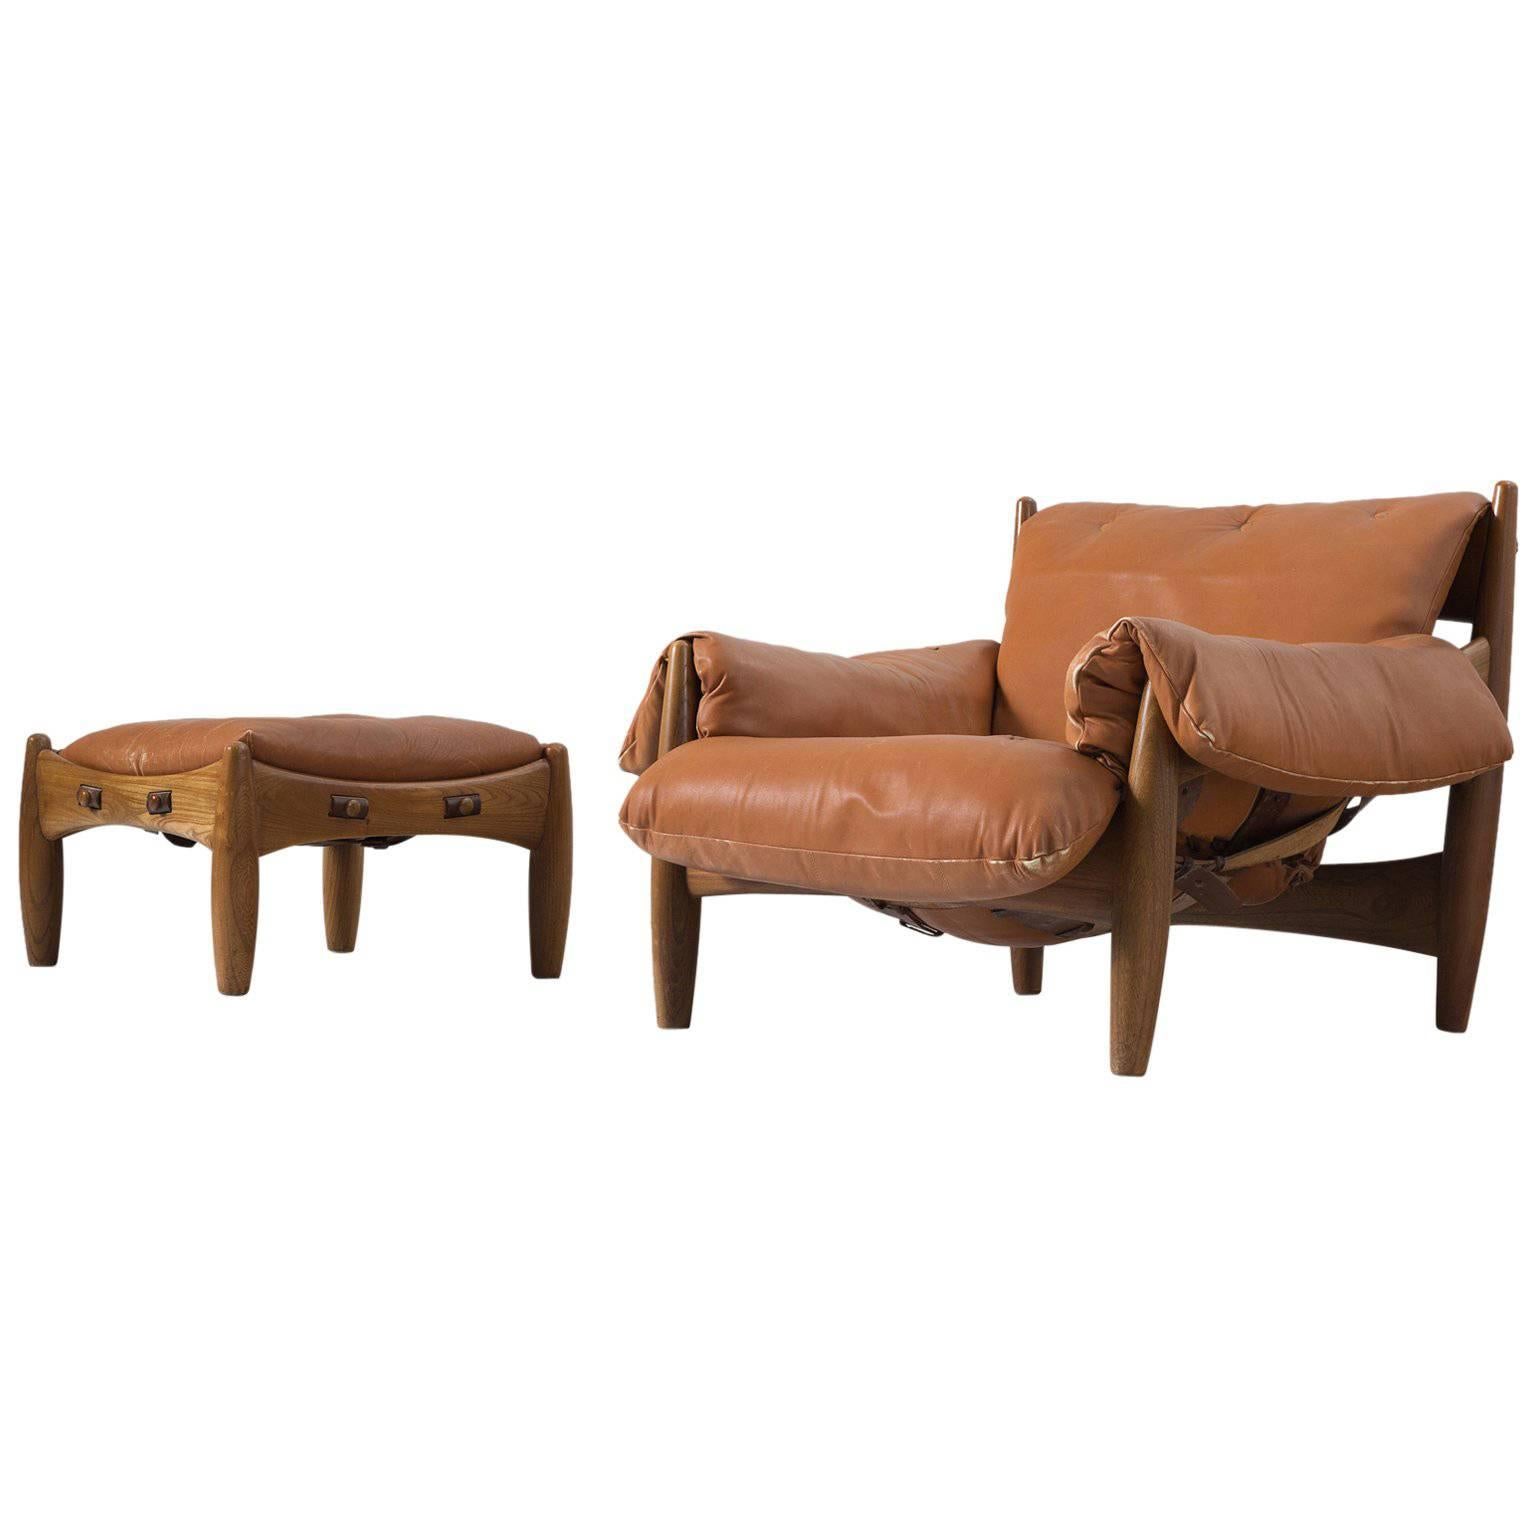 Sergio Rodrigues 'Sheriff' Lounge Chair with Ottoman in Original Cognac Leather